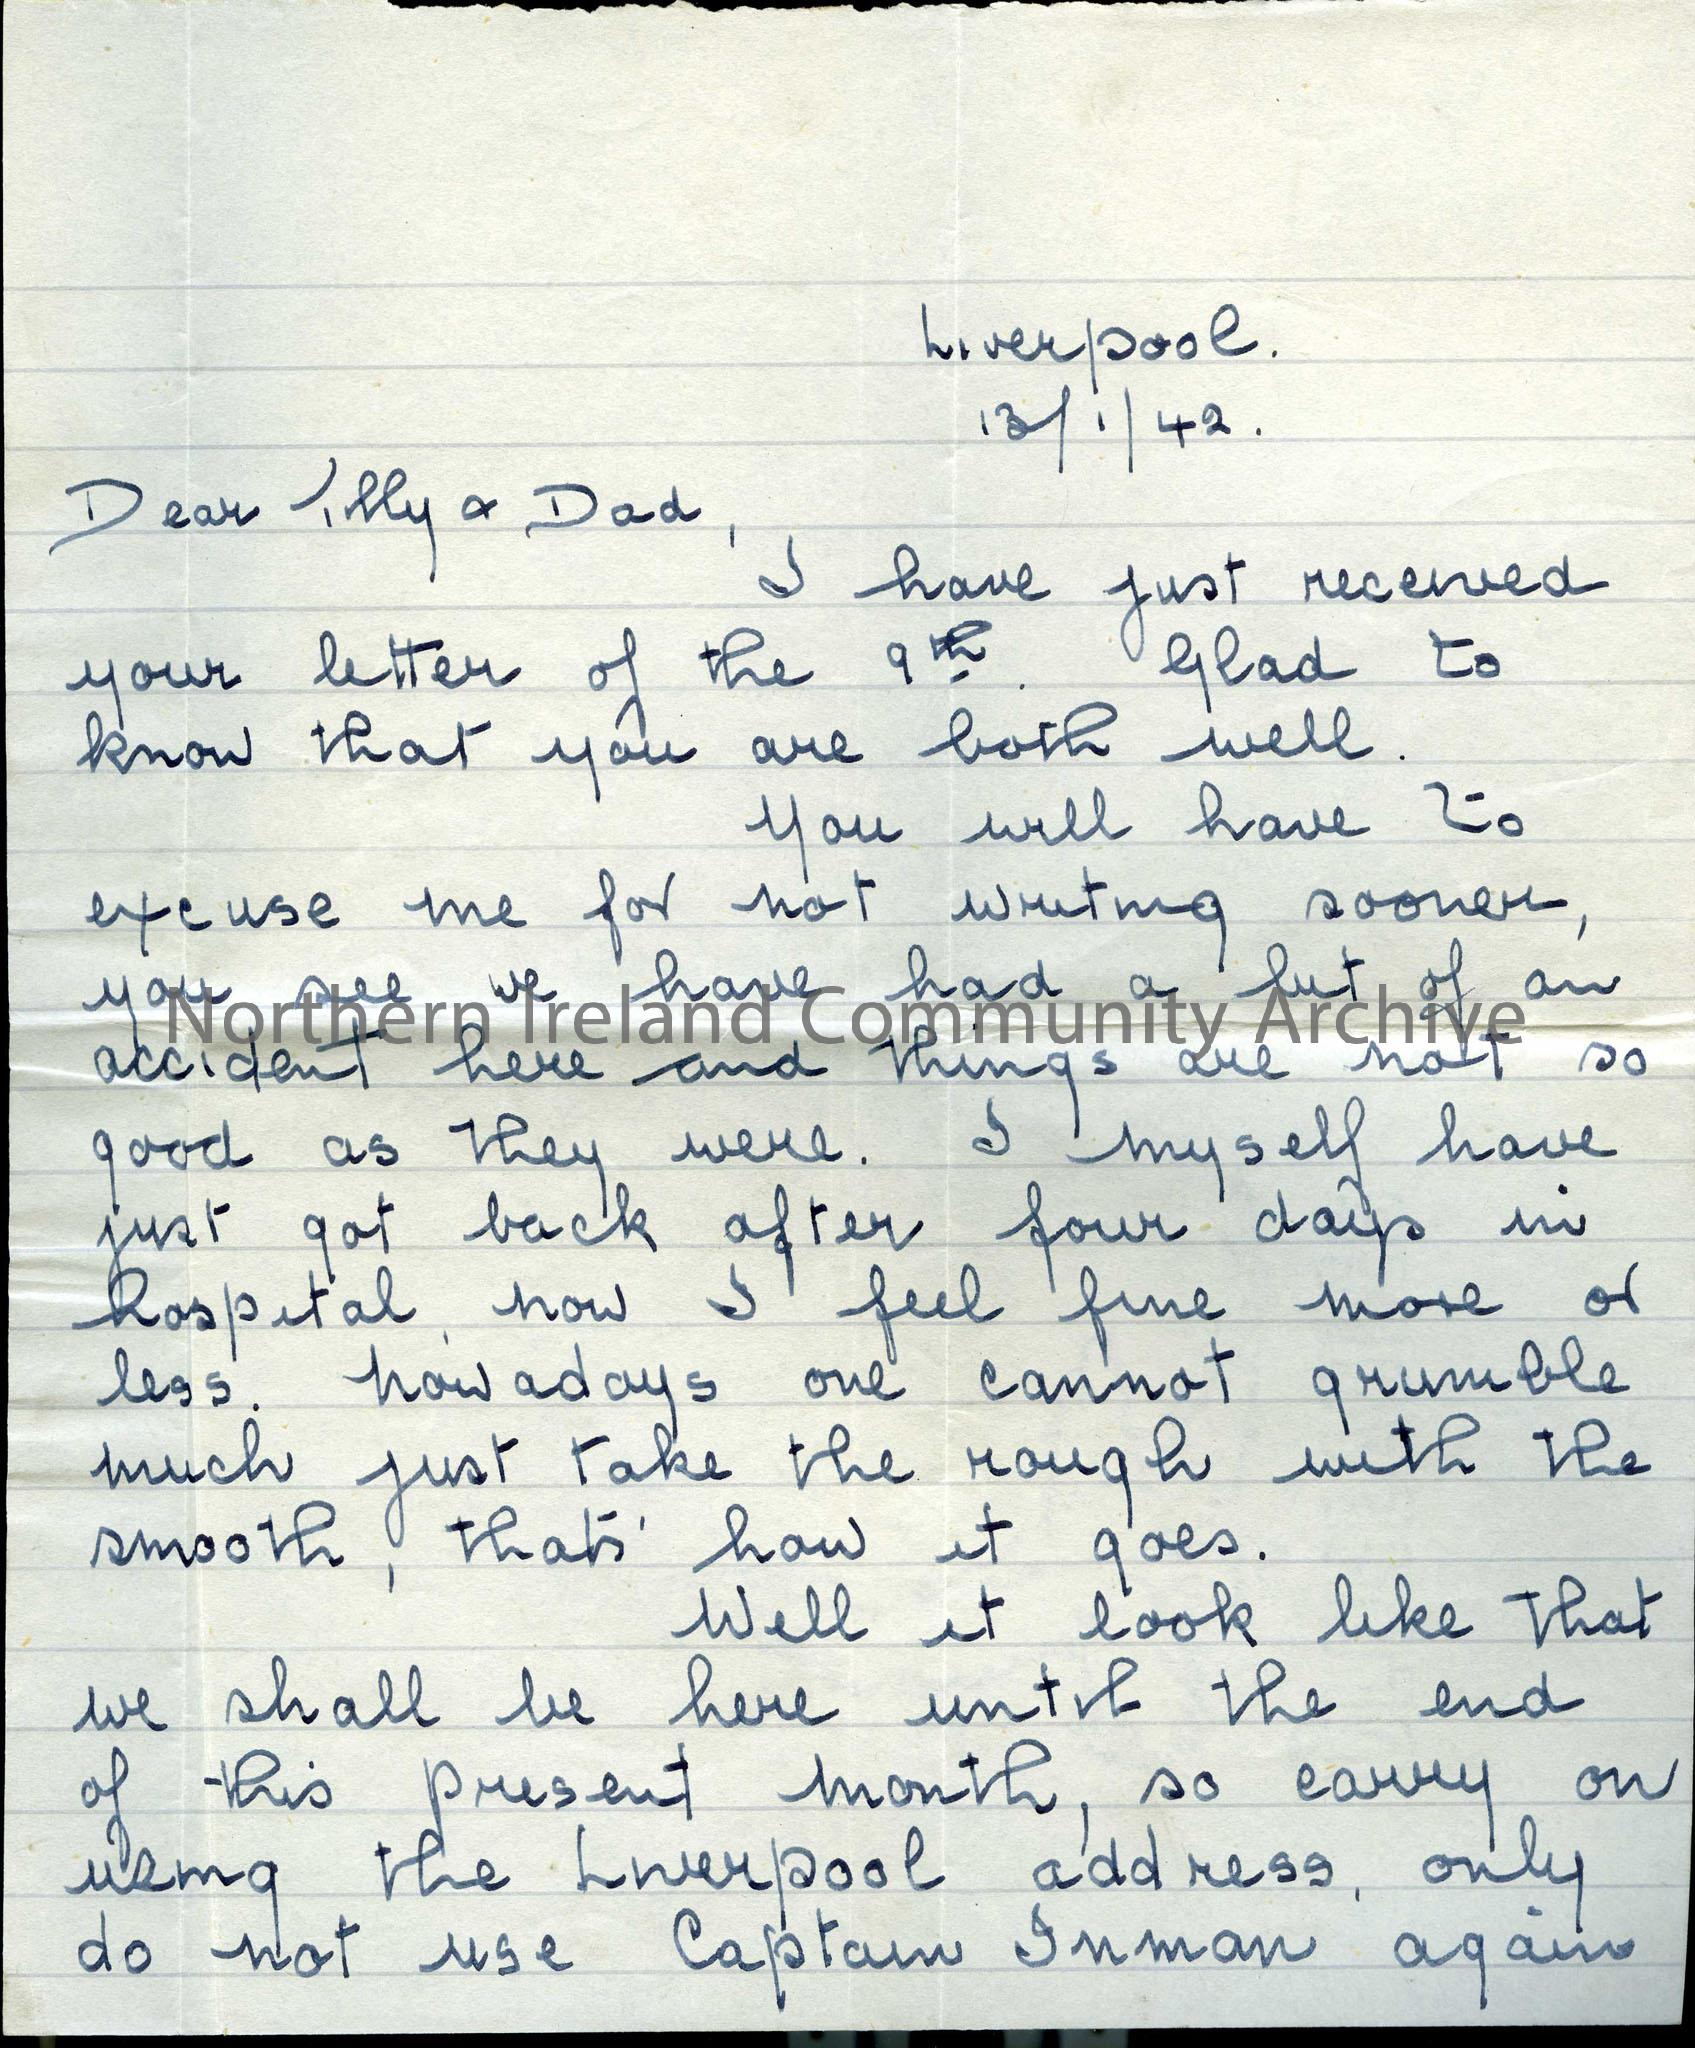 Page one of two – Addressed to Tilly and Dad from Bill (William). Sent from Liverpool, 13th January 1942. Apologises for not writing sooner. Writes th…